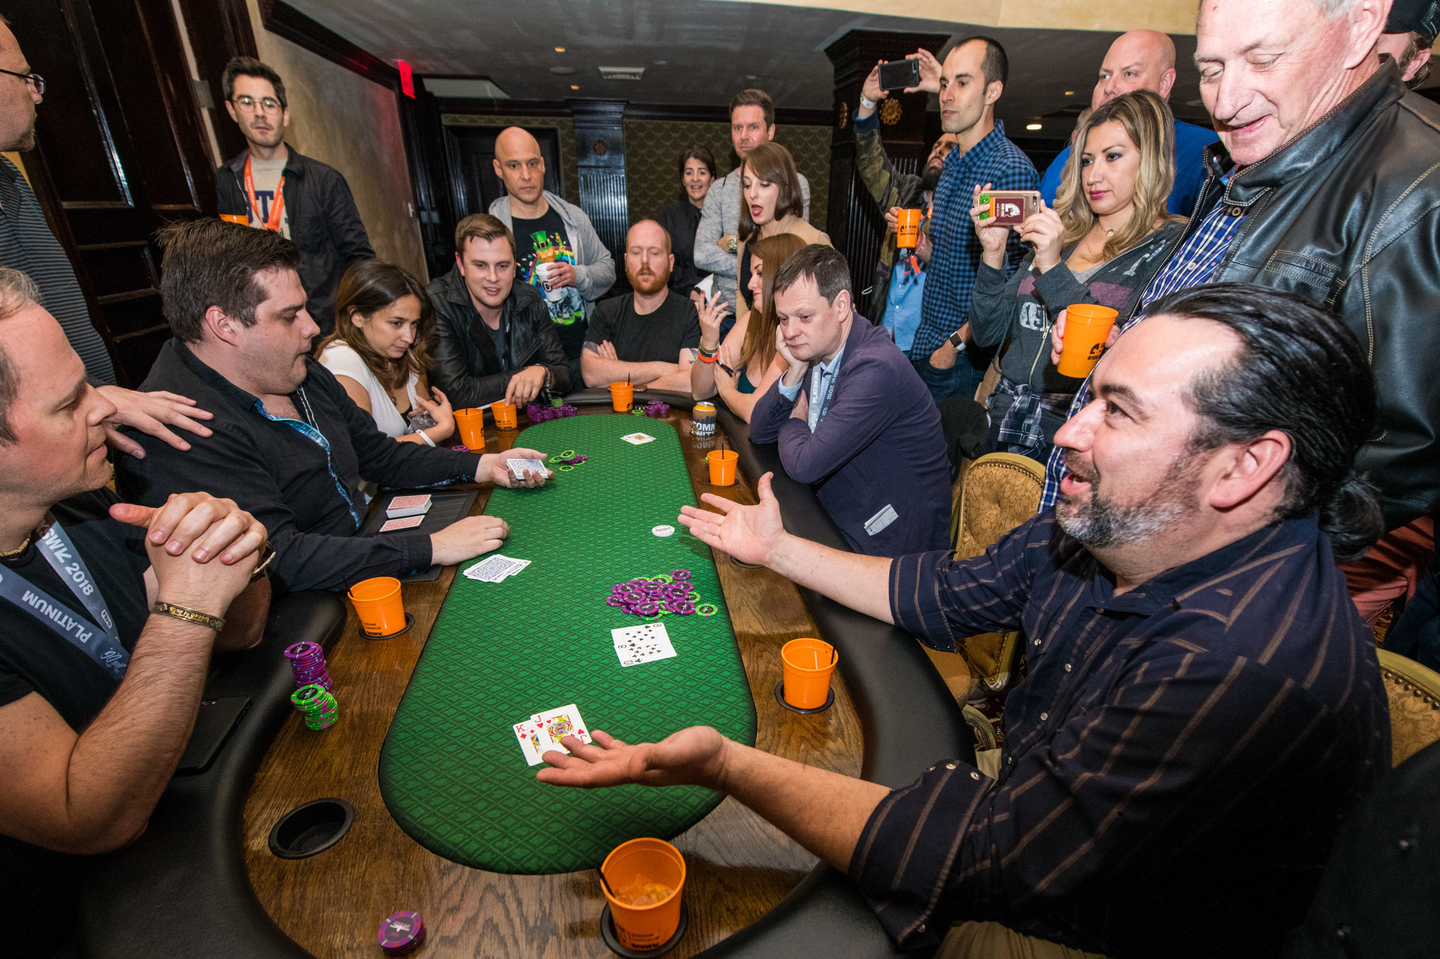 Kimo Sabe Mezcal Trusted Friend Poker Tournament with Phil Hellmuth. Photo by David Brendan Hall